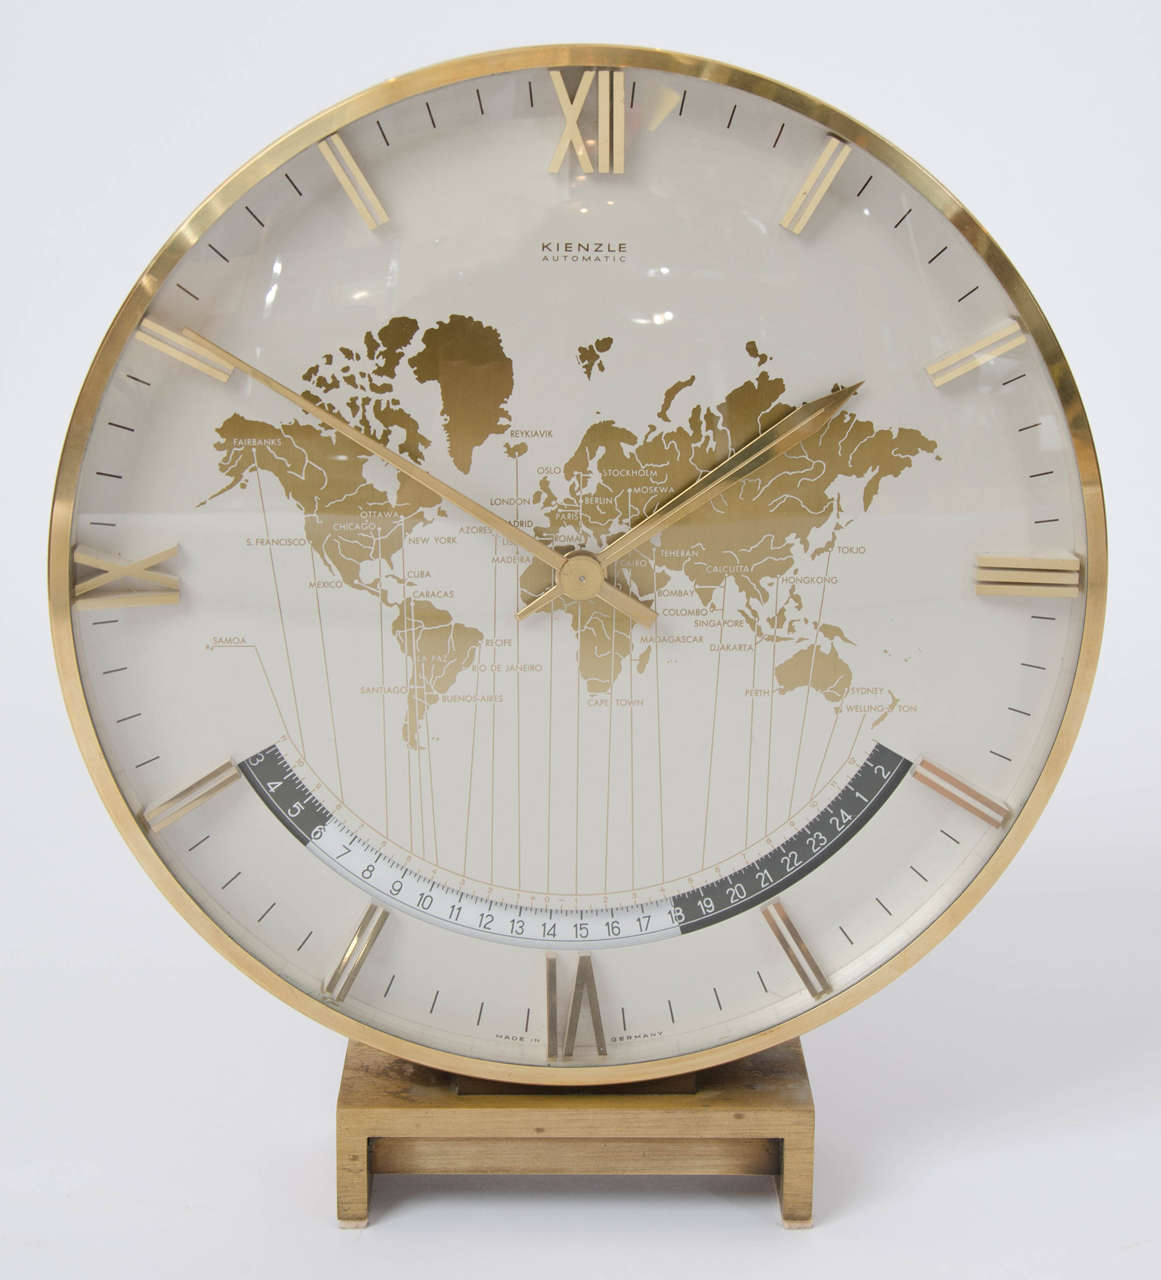 Large brass electric clock by Kienzle, innovative makers of table clocks and other time pieces founded 1883.